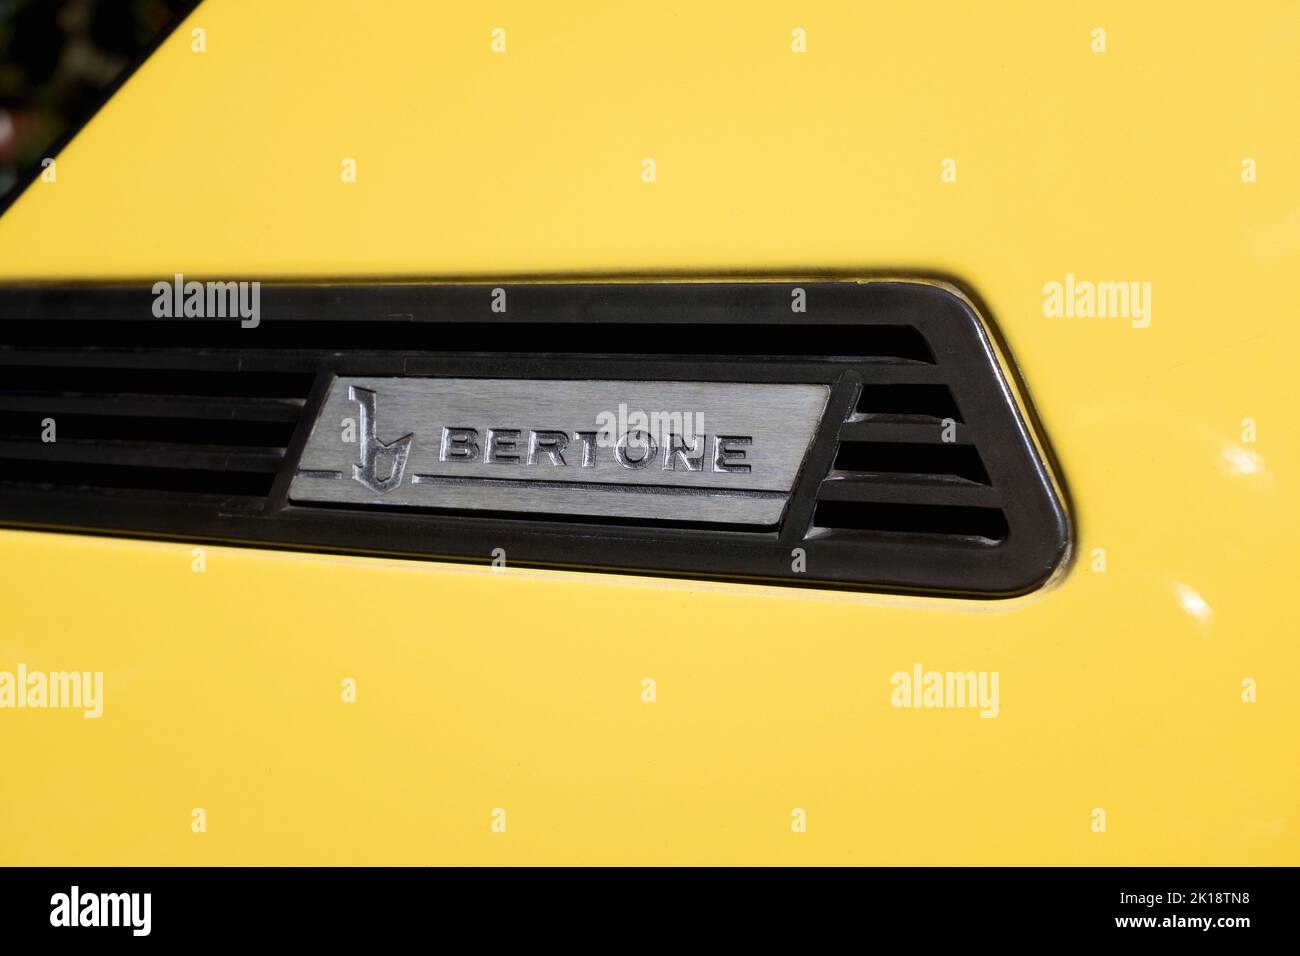 Badge and logo on the yellow painted bodywork of a Bertone car at a Classic car show in Saffron Walden, Essex, United Kingdom Stock Photo